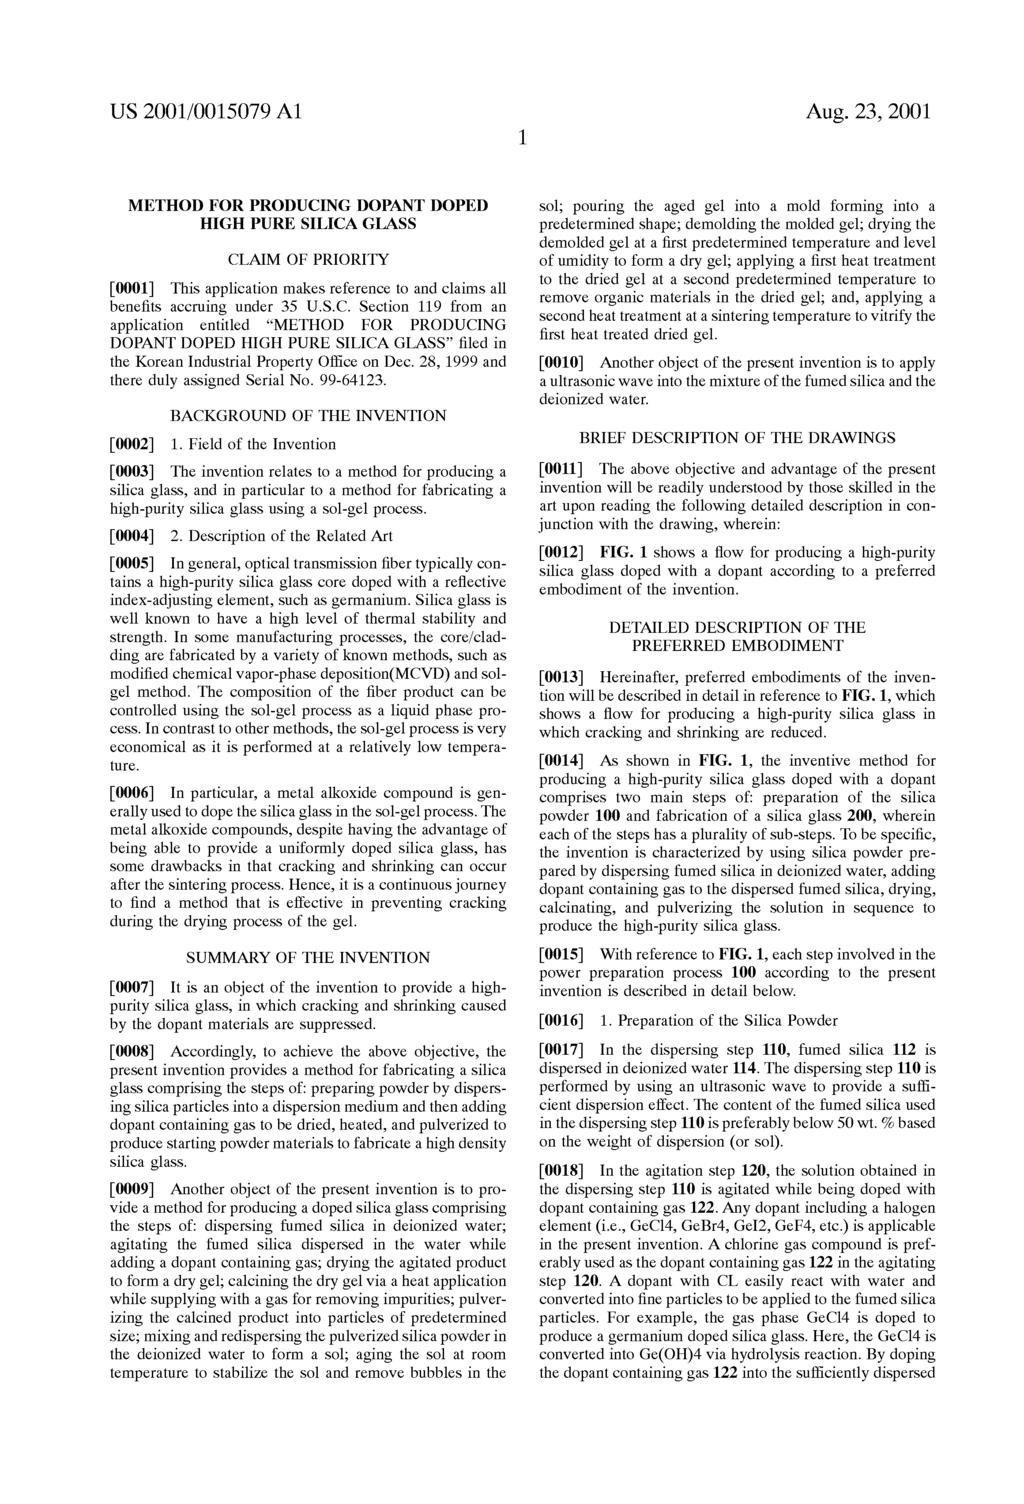 METHOD FOR PRODUCING DOPANT DOPED HIGH PURE SILICA GLASS CLAIM OF PRIORITY 0001. This application makes reference to and claims all benefits accruing under 35 U.S.C. Section 119 from an application entitled METHOD FOR PRODUCING DOPANT DOPED HIGH PURE SILICA GLASS fled in the Korean Industrial Property Office on Dec.